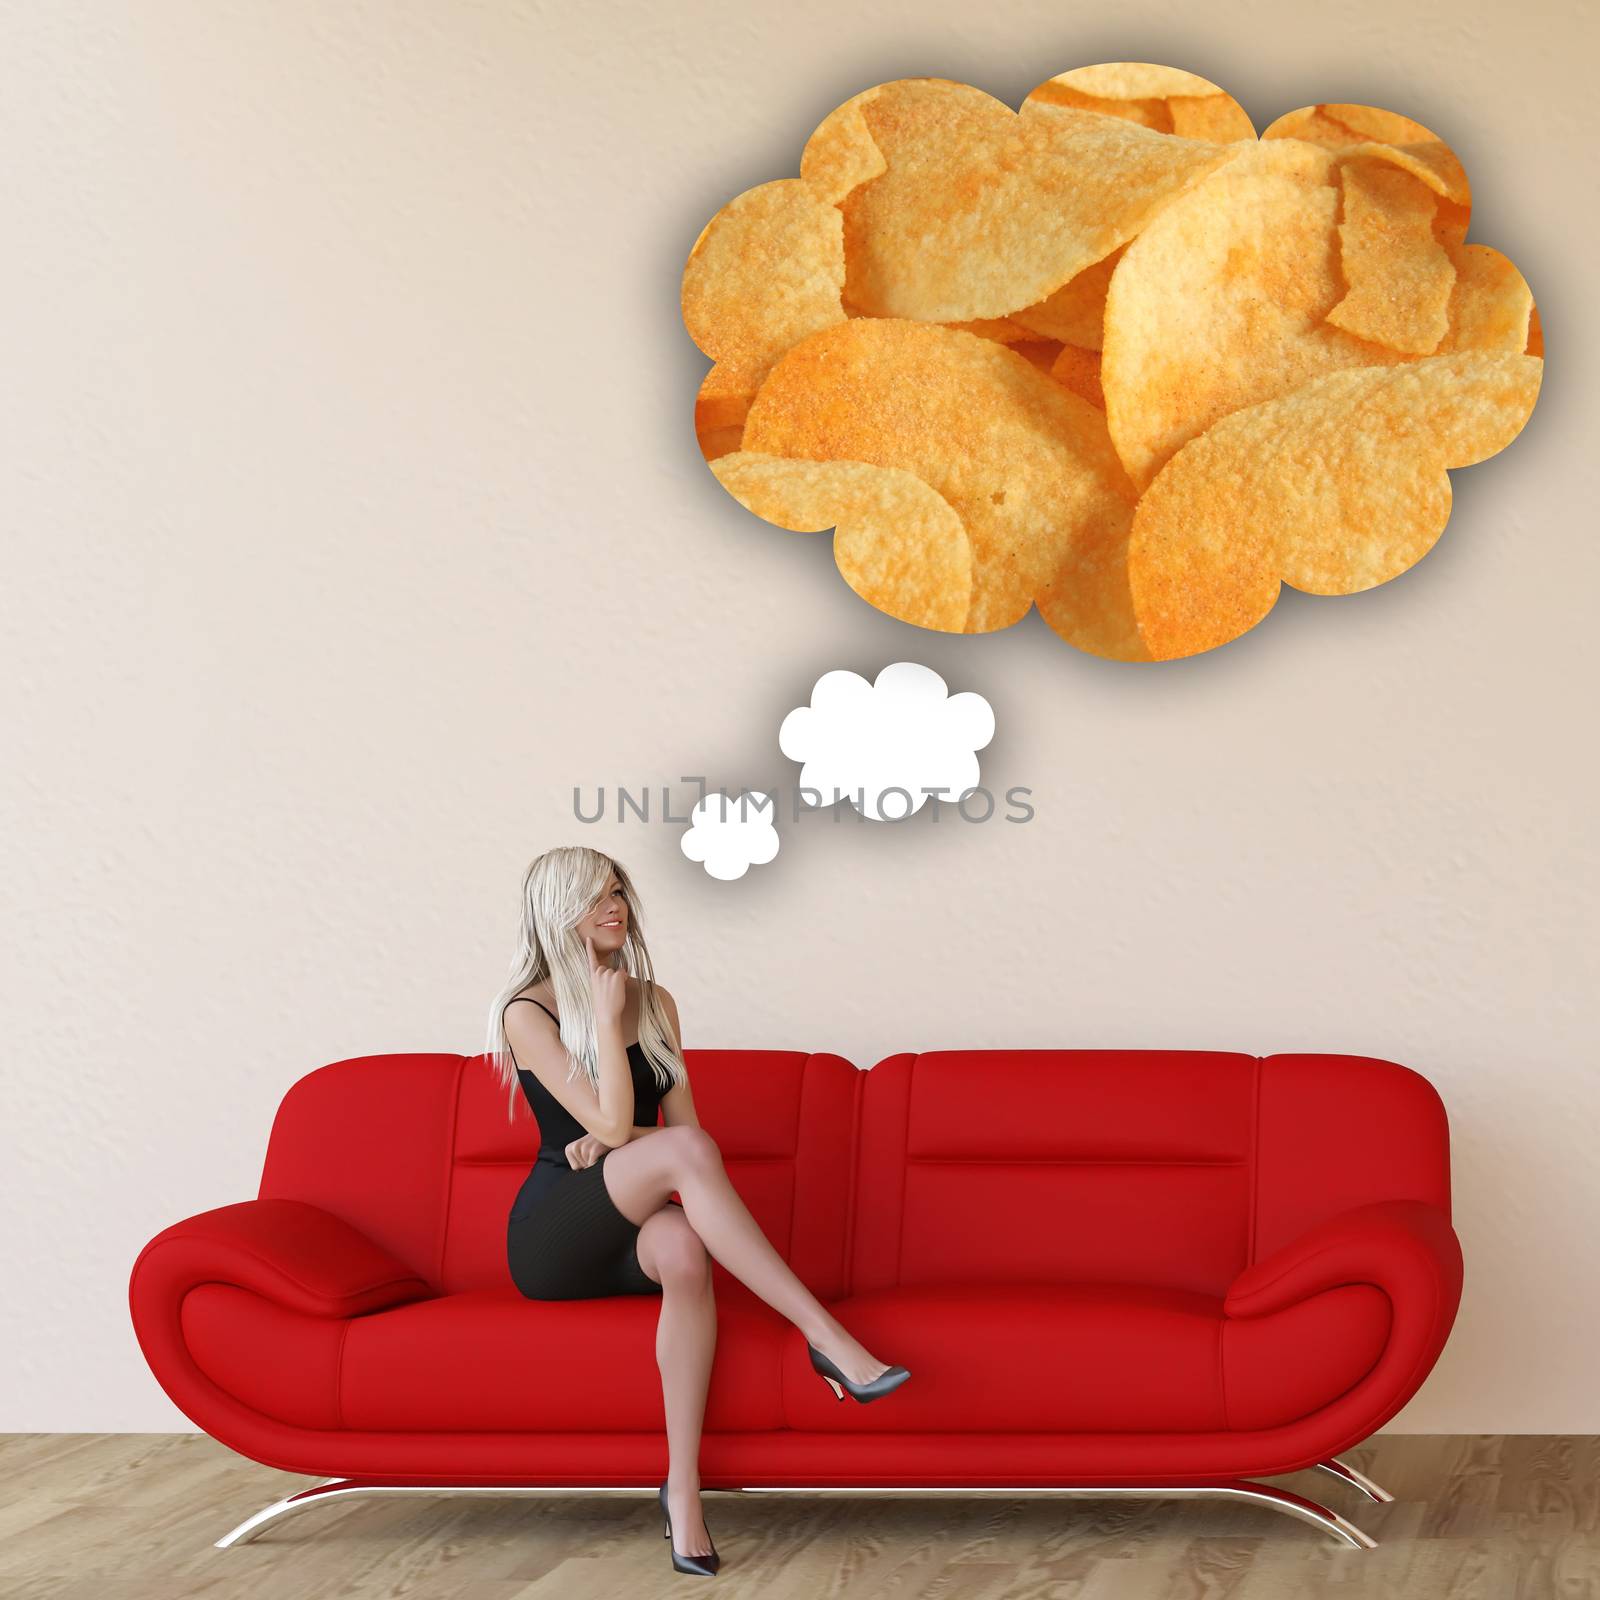 Woman Craving Potato Chips and Thinking About Eating Food